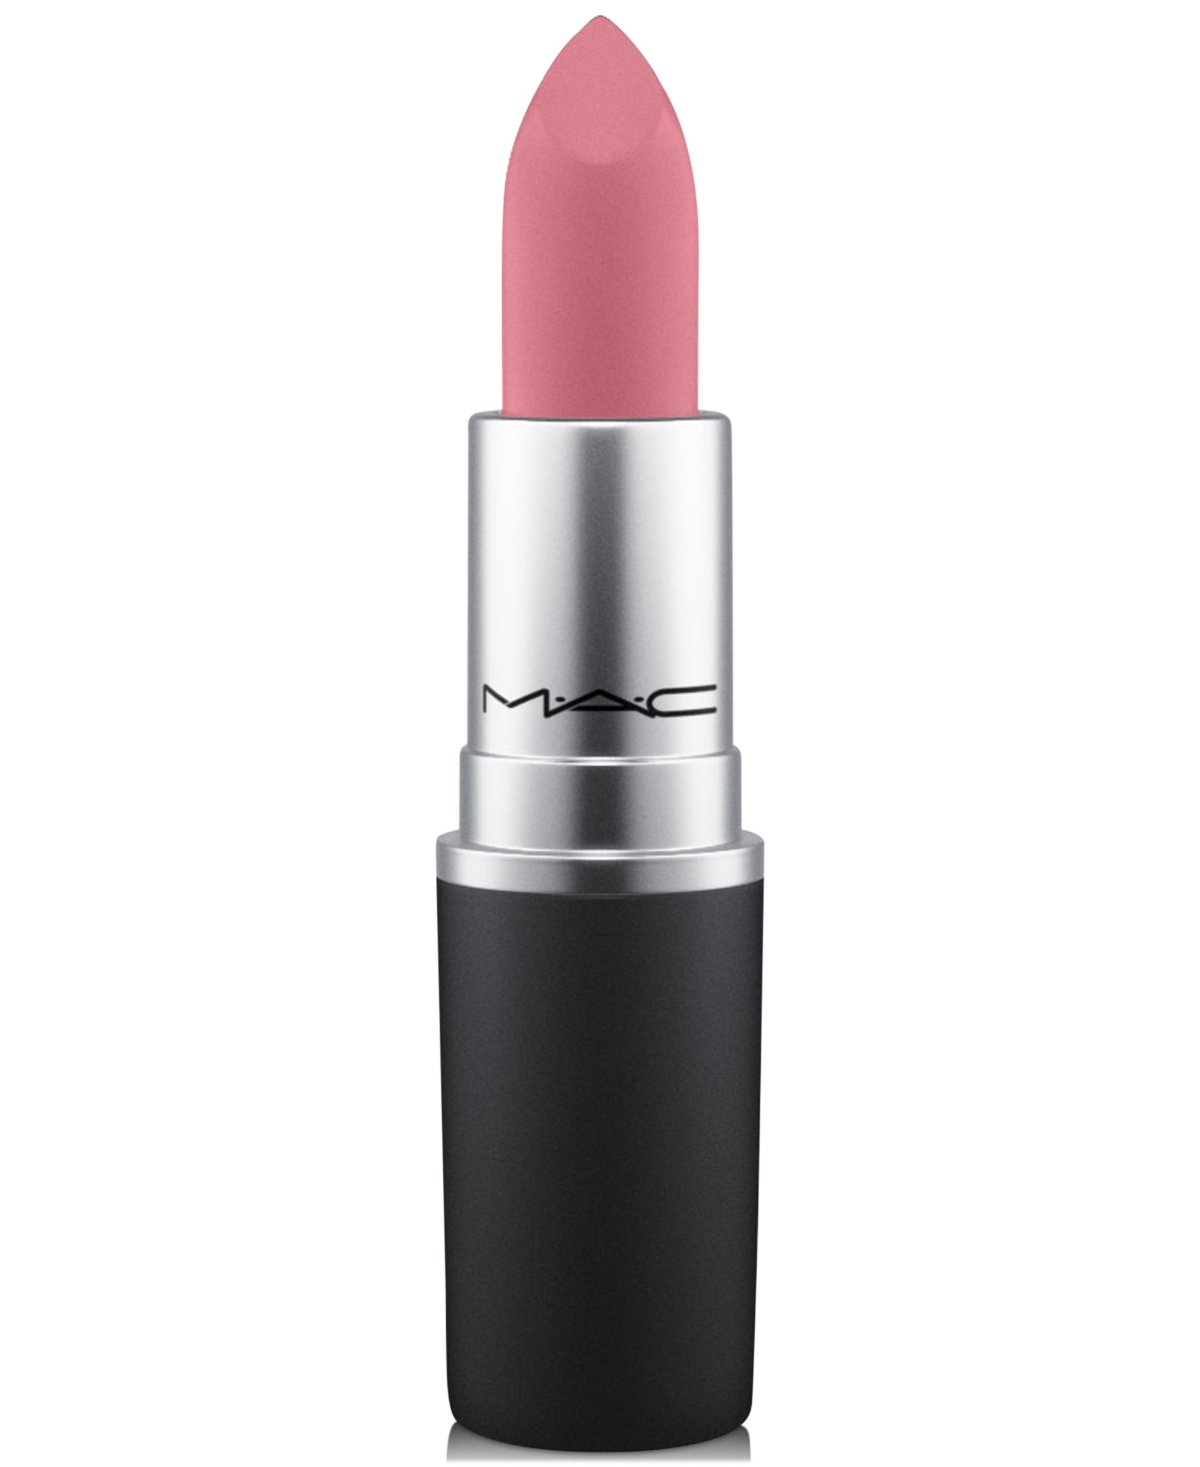 Mac Powder Kiss Lipstick In Sultriness (baby Blue Pink)